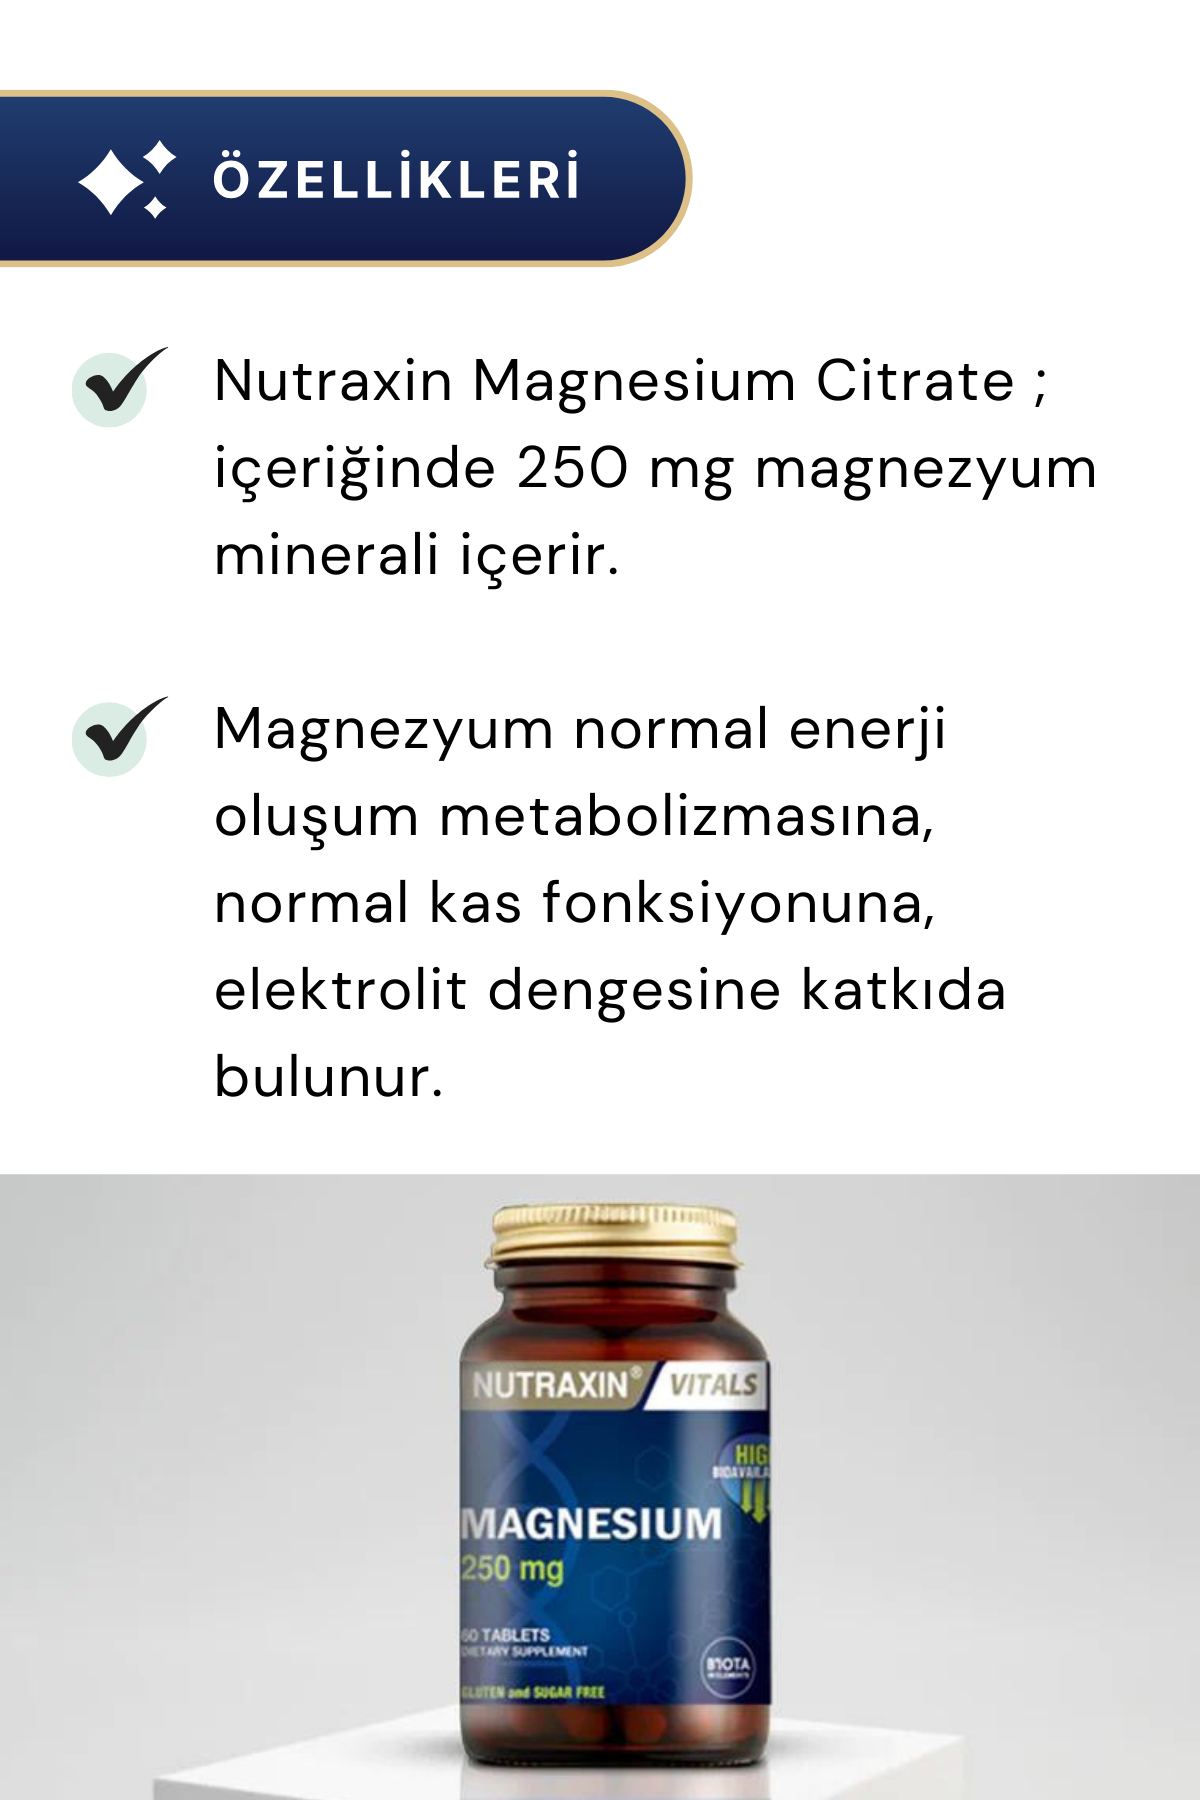 Nutraxin Magnesium Citrate 250 mg 60 Tablet 5'li Paket